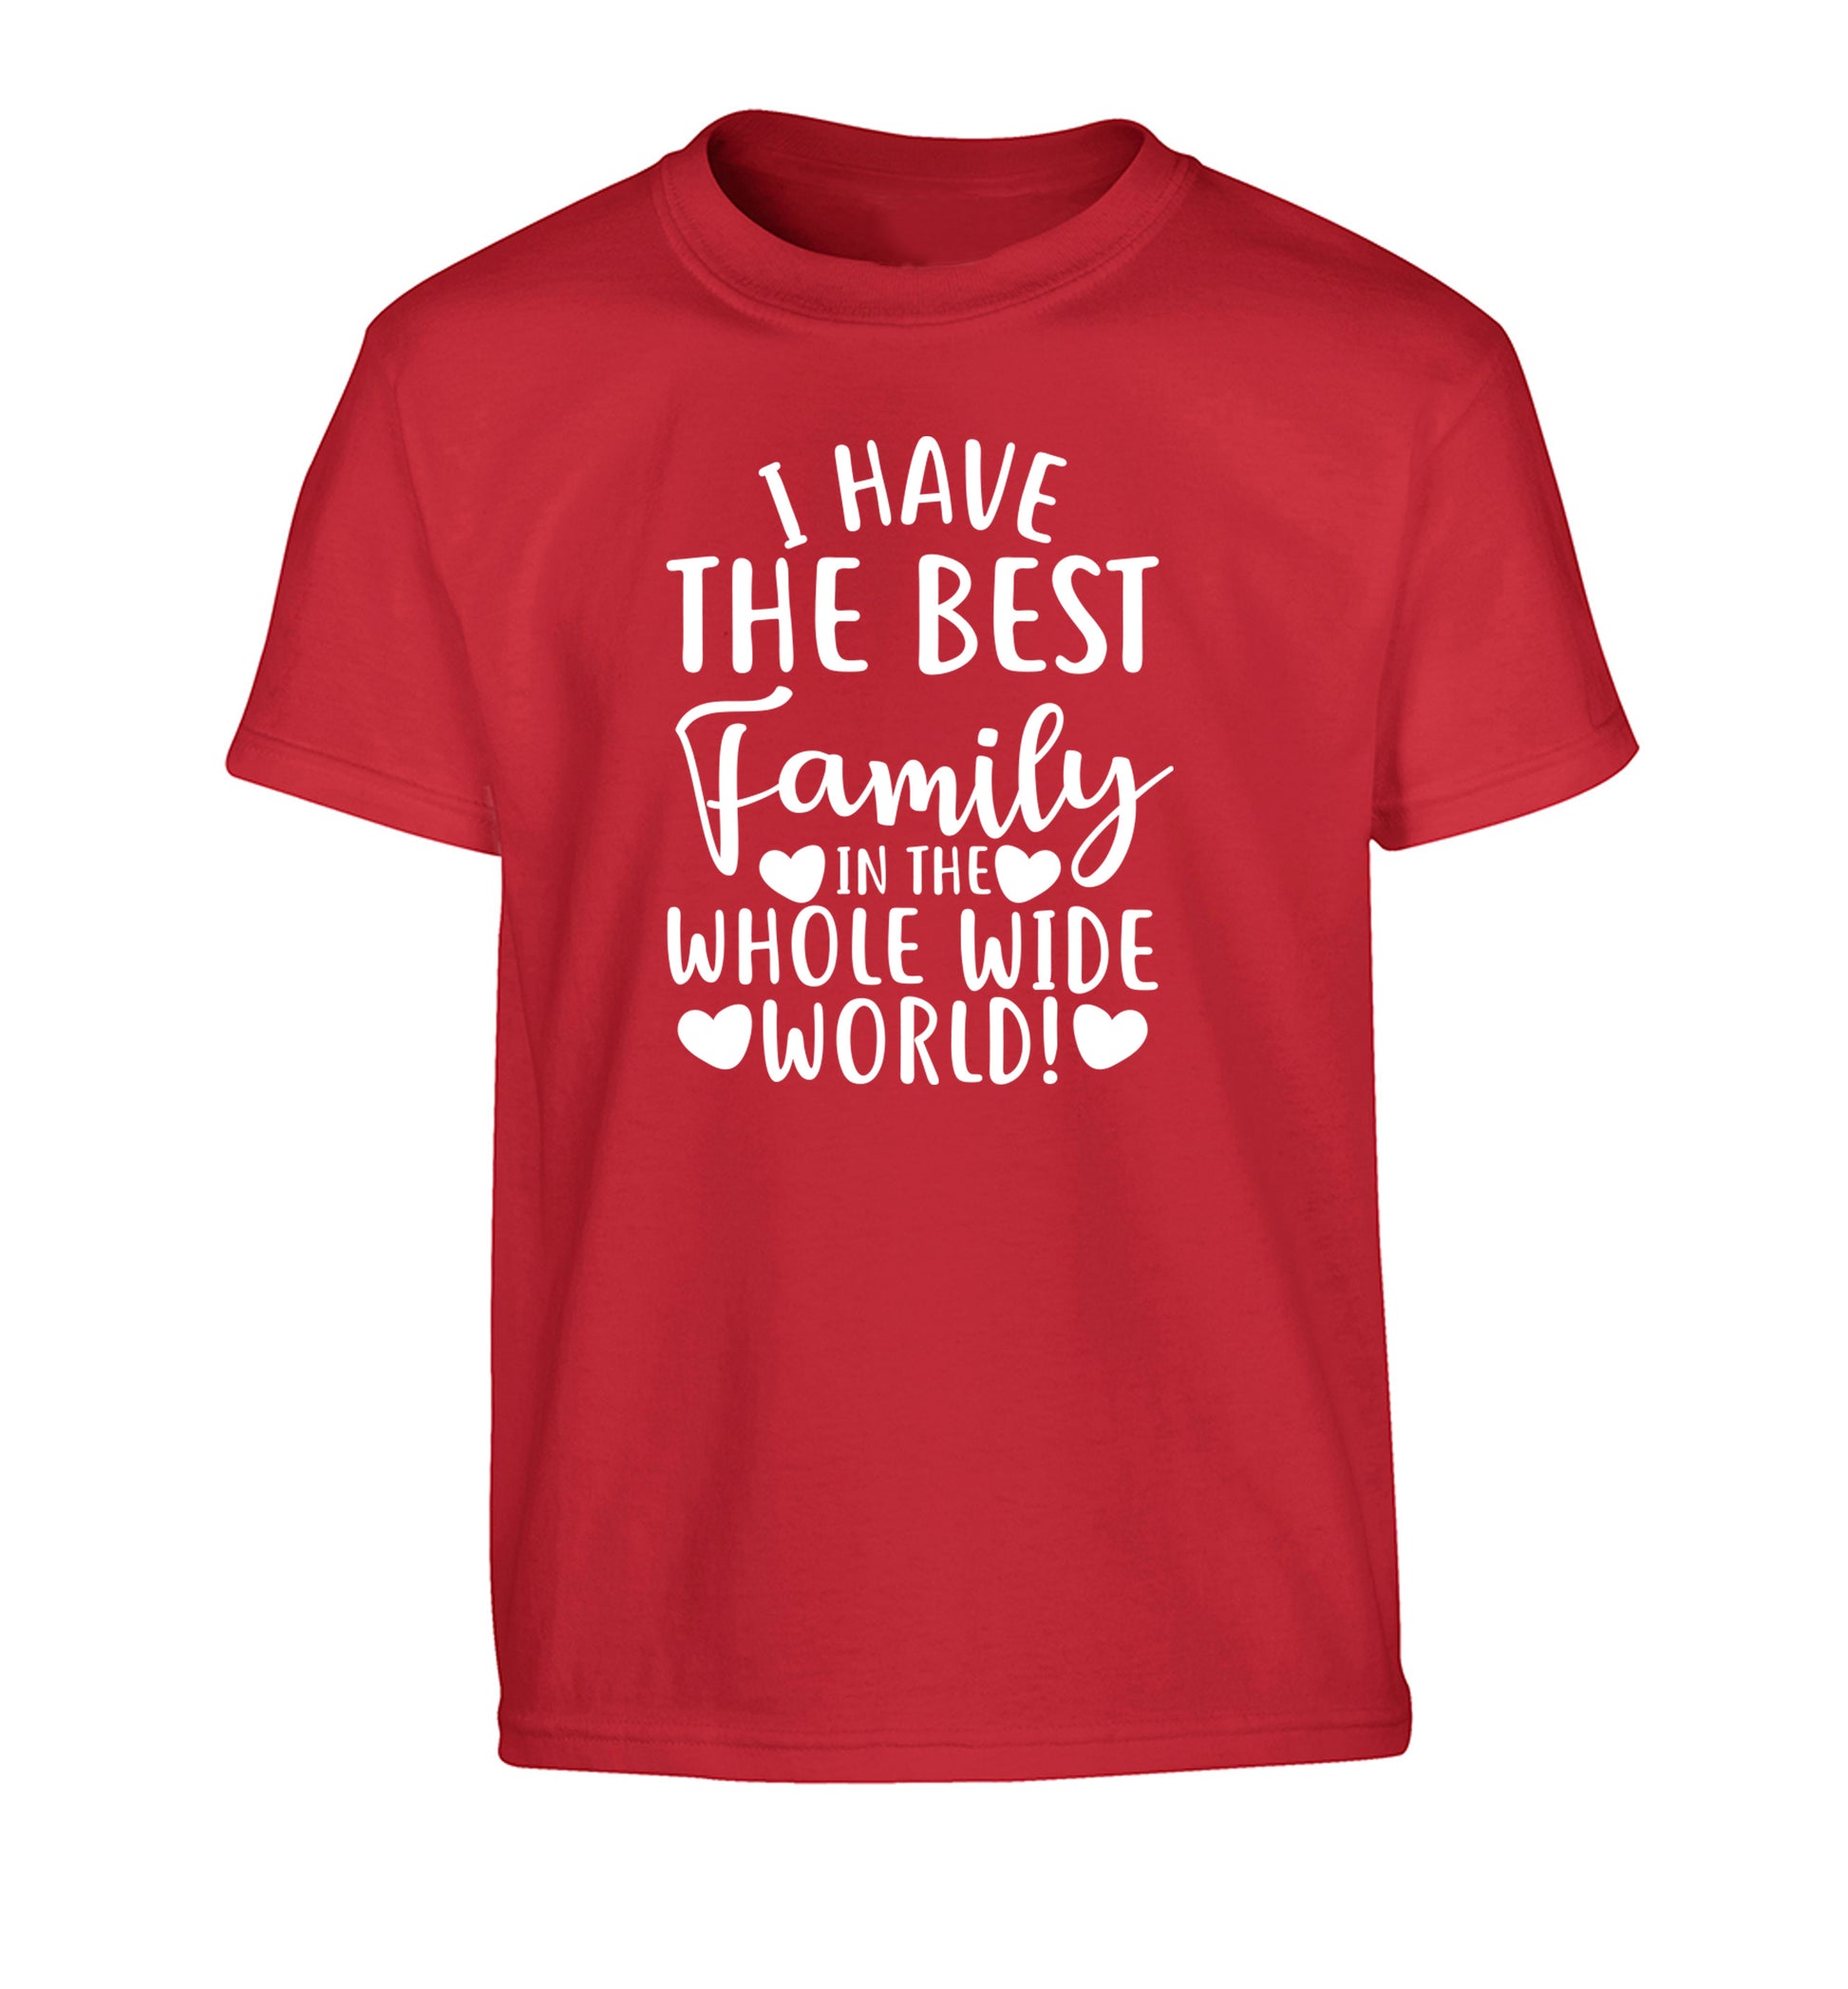 I have the best family in the whole wide world! Children's red Tshirt 12-13 Years